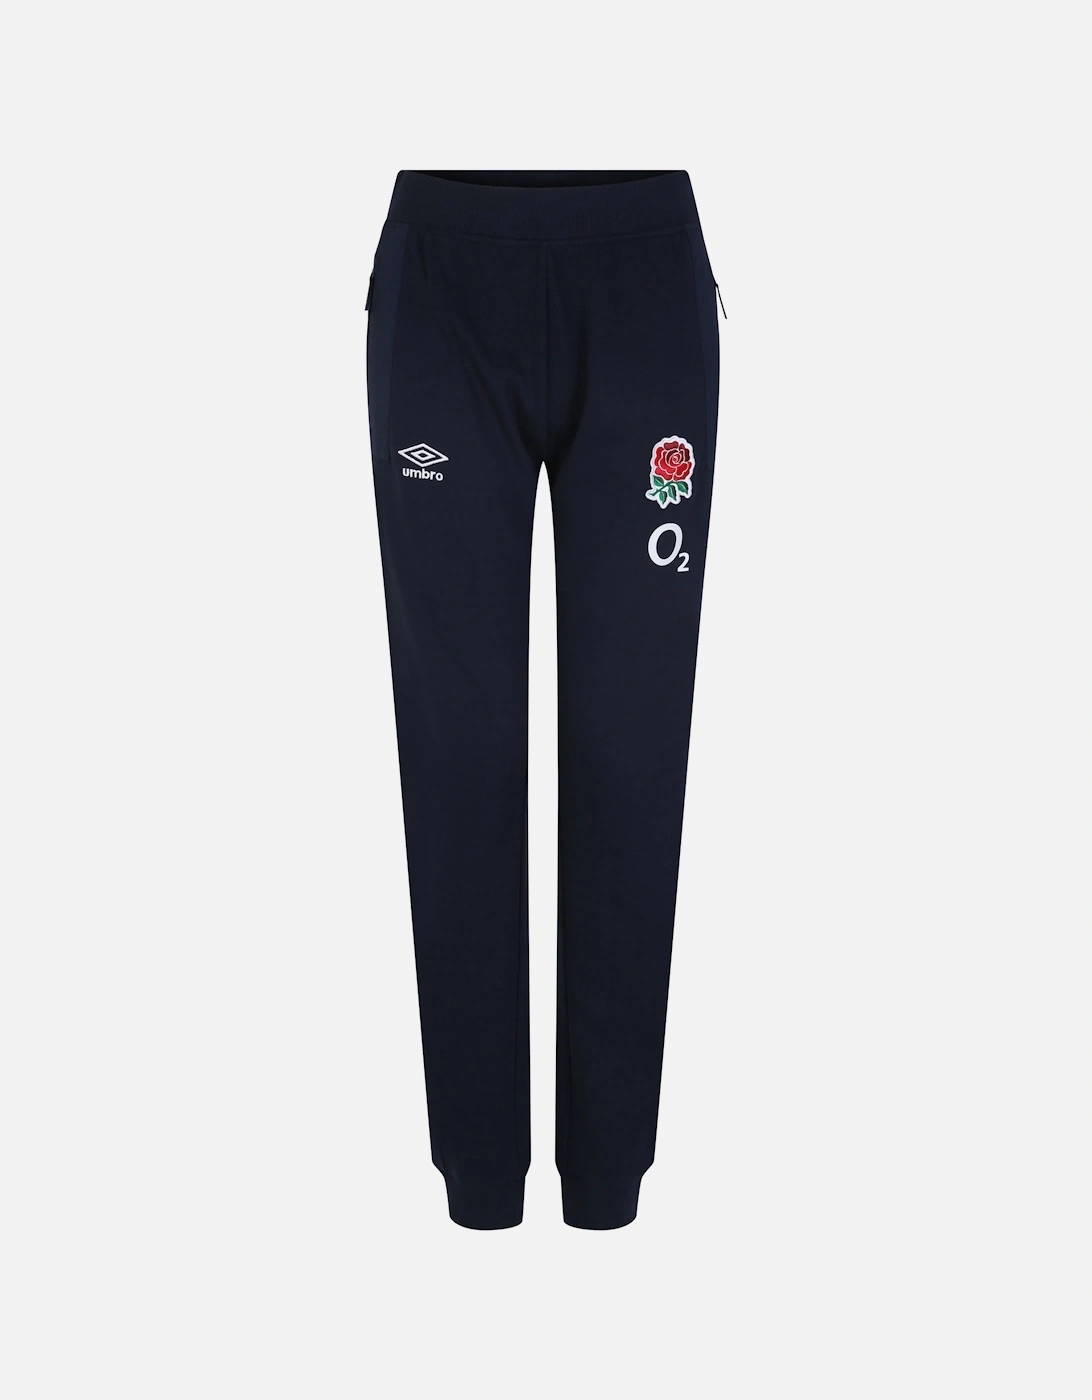 Womens/Ladies 23/24 Fleece England Rugby Jogging Bottoms, 5 of 4